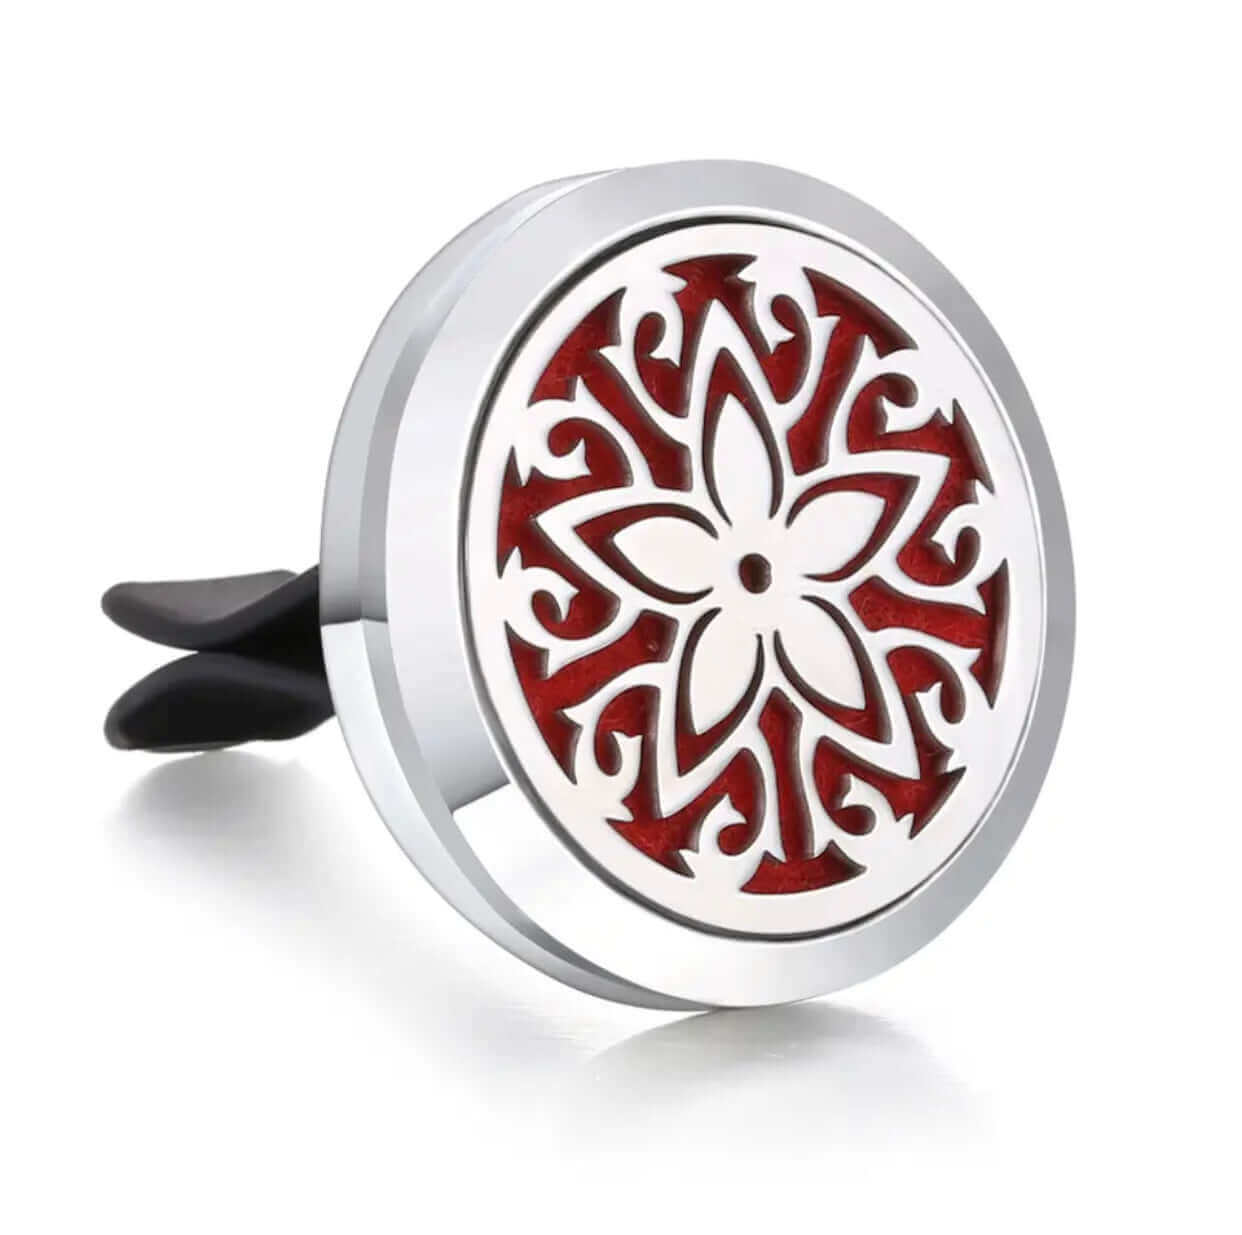 Modern aromatherapy scent medallion for the car in different designs